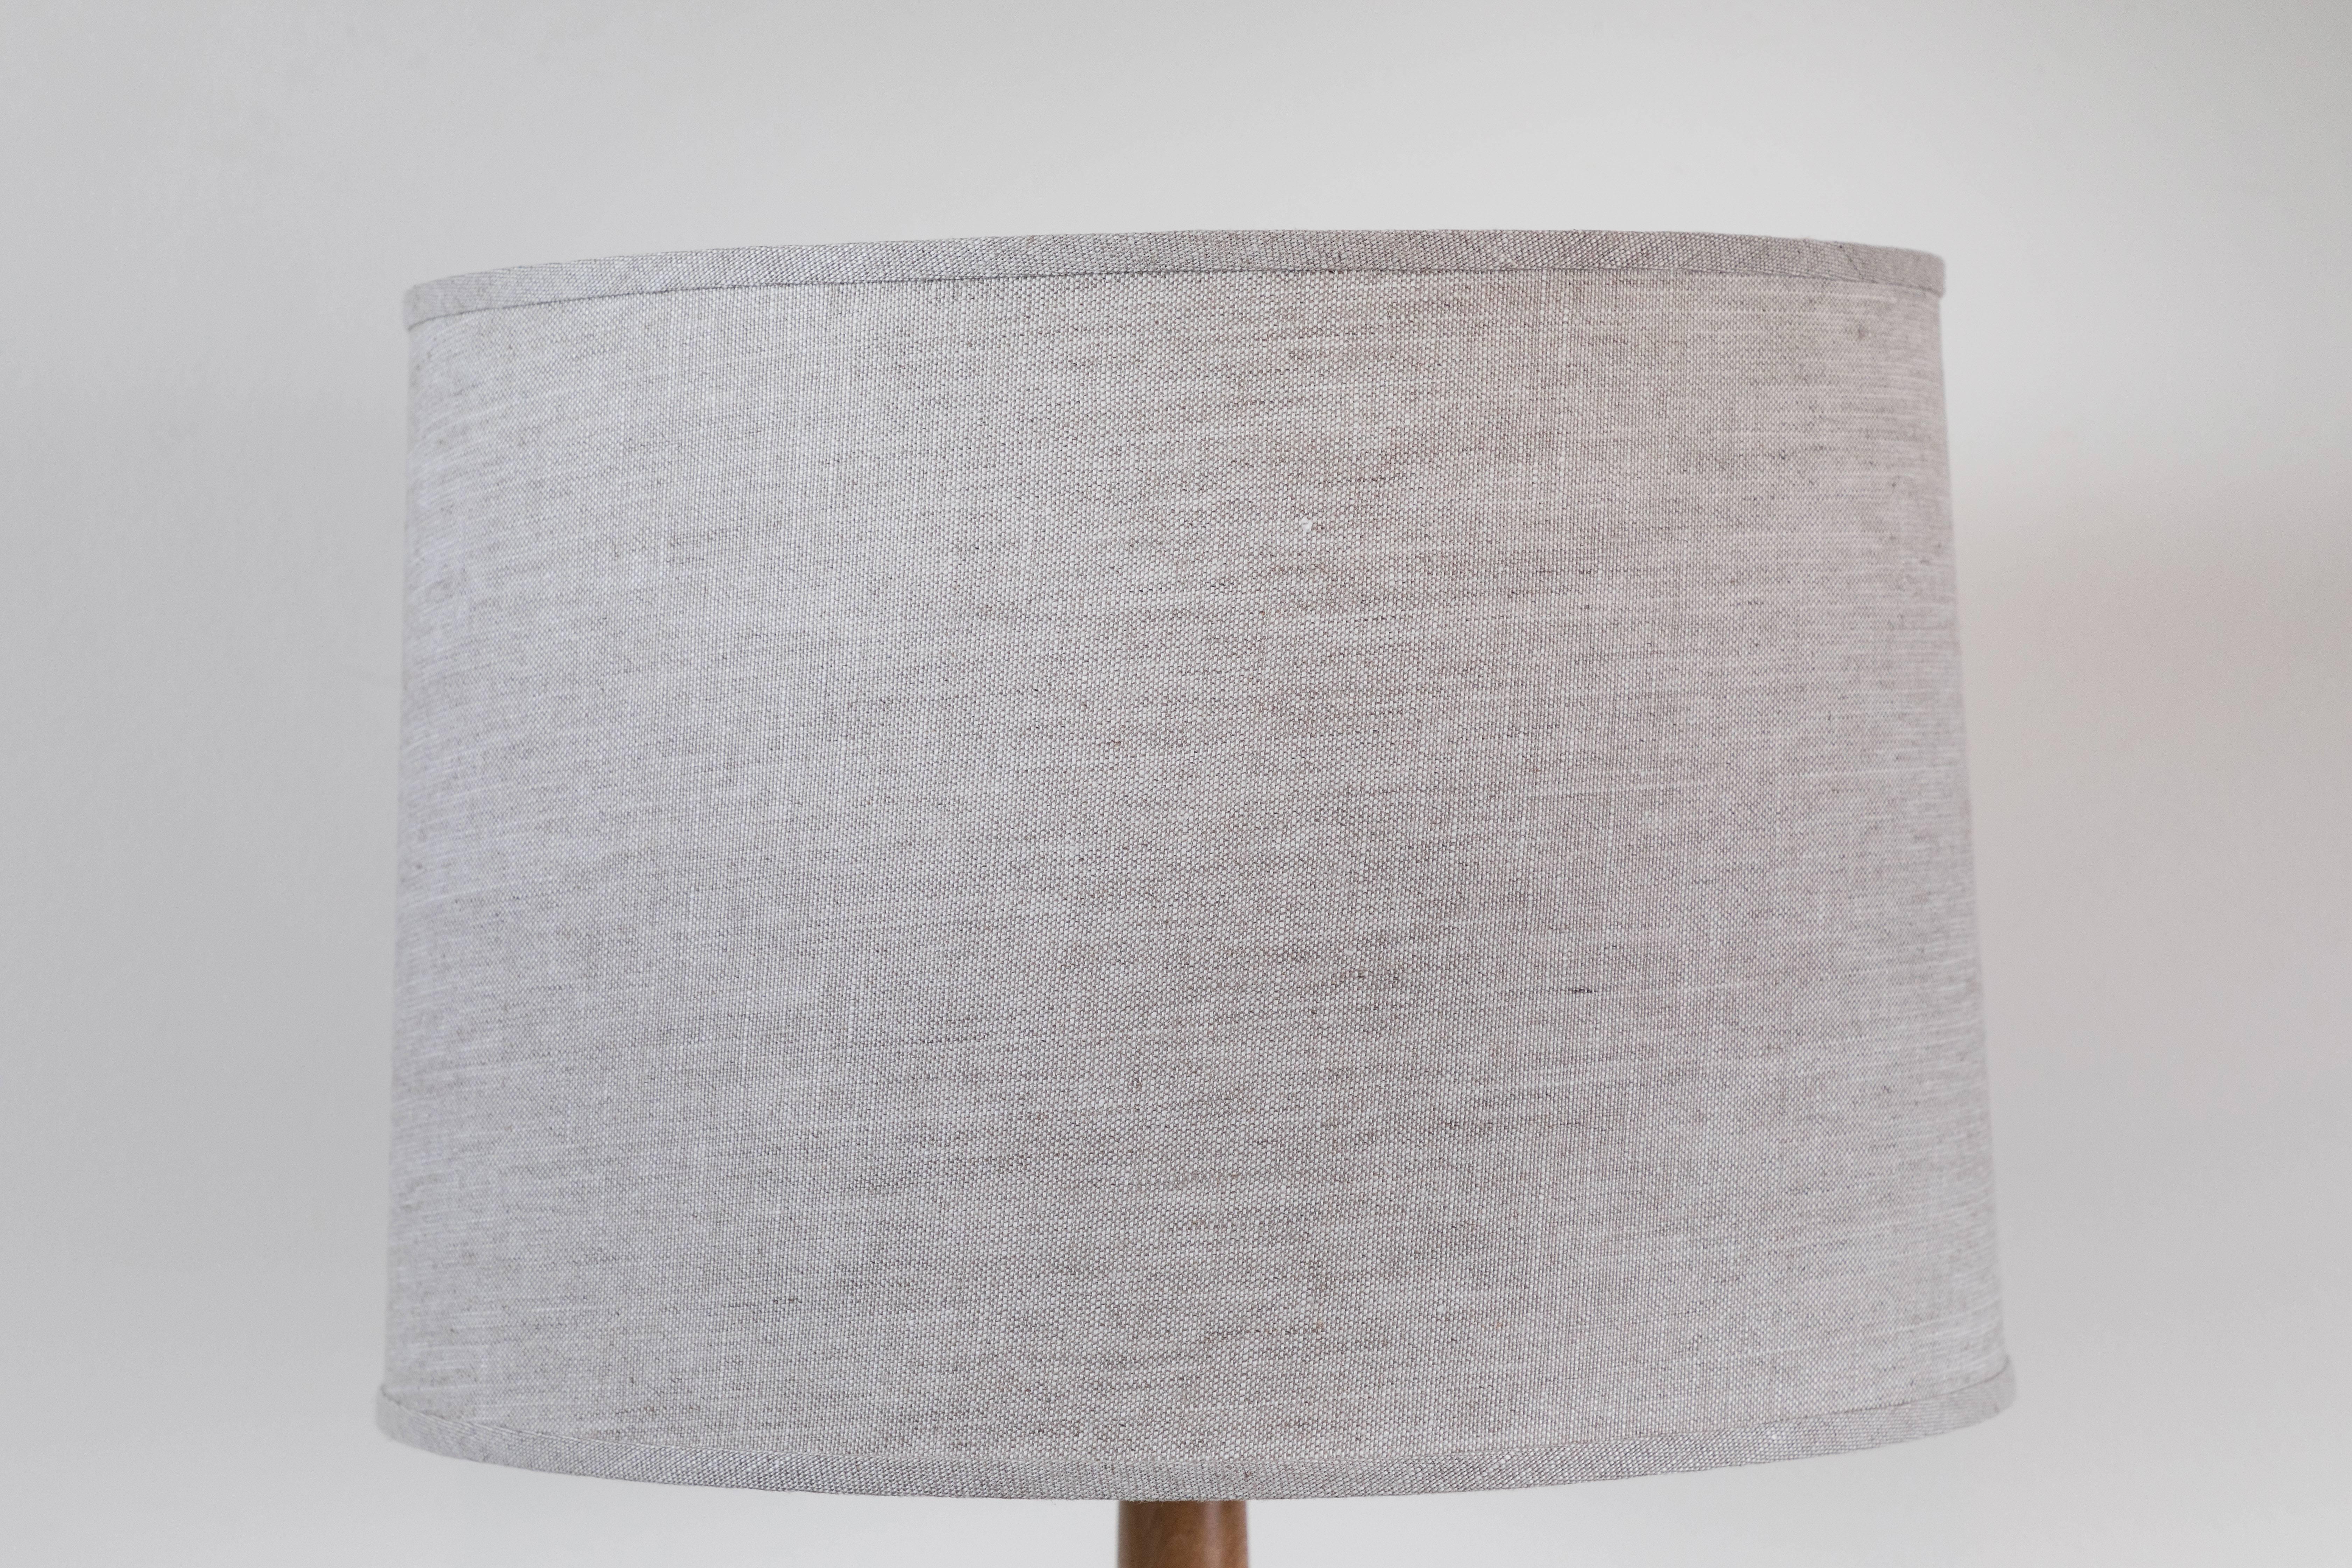 Contemporary Pair of Miller Lamps by Stone and Sawyer for Lawson-Fenning